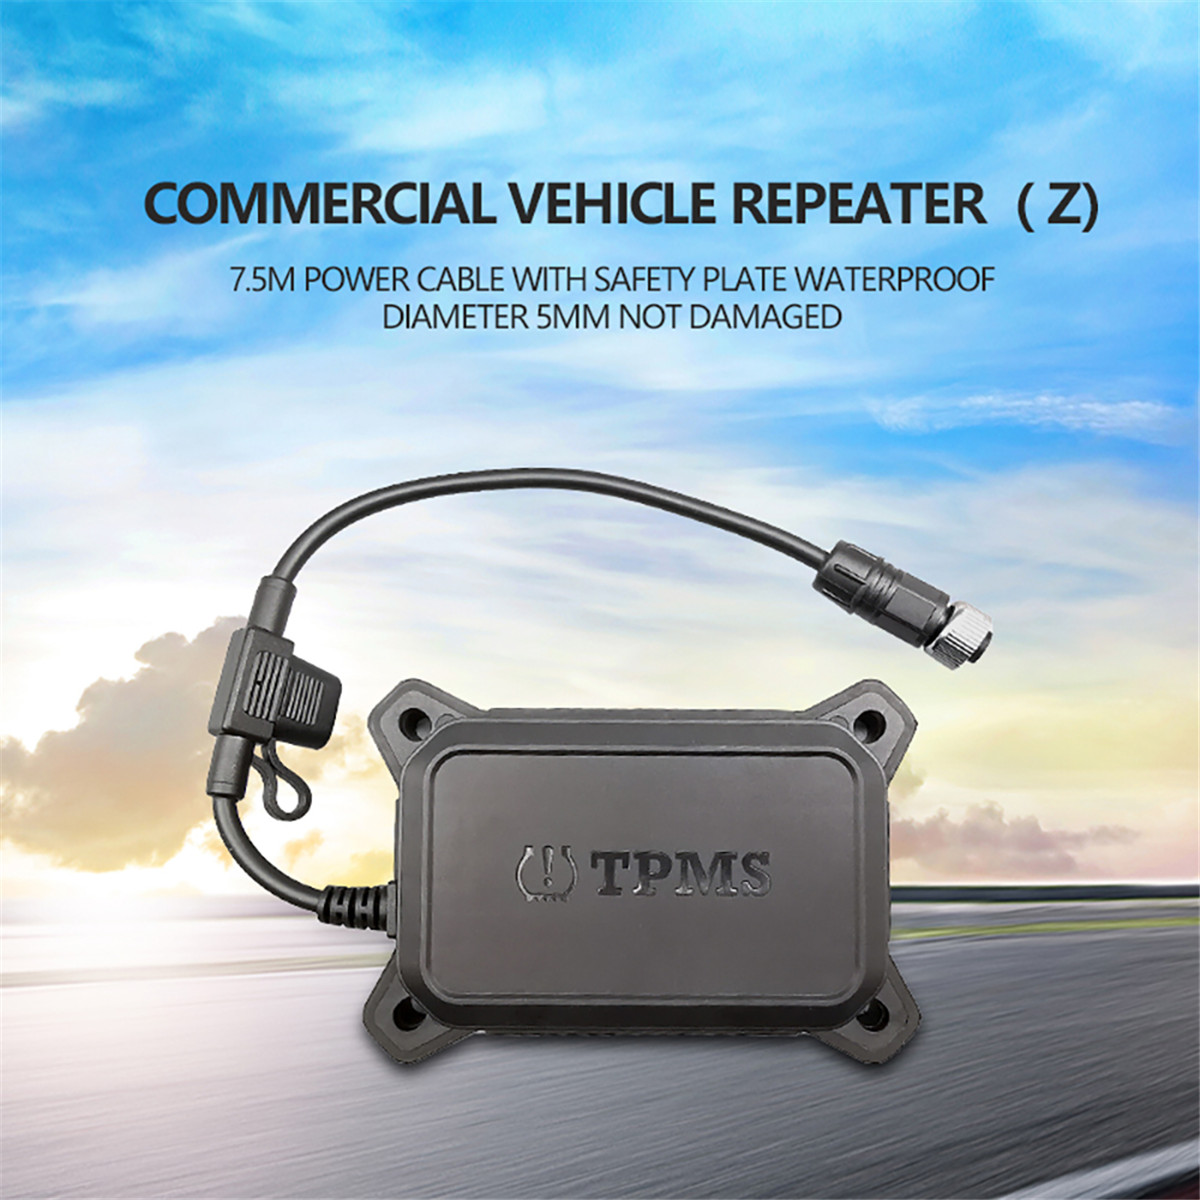 Commercial vehicle repeater01 (13)